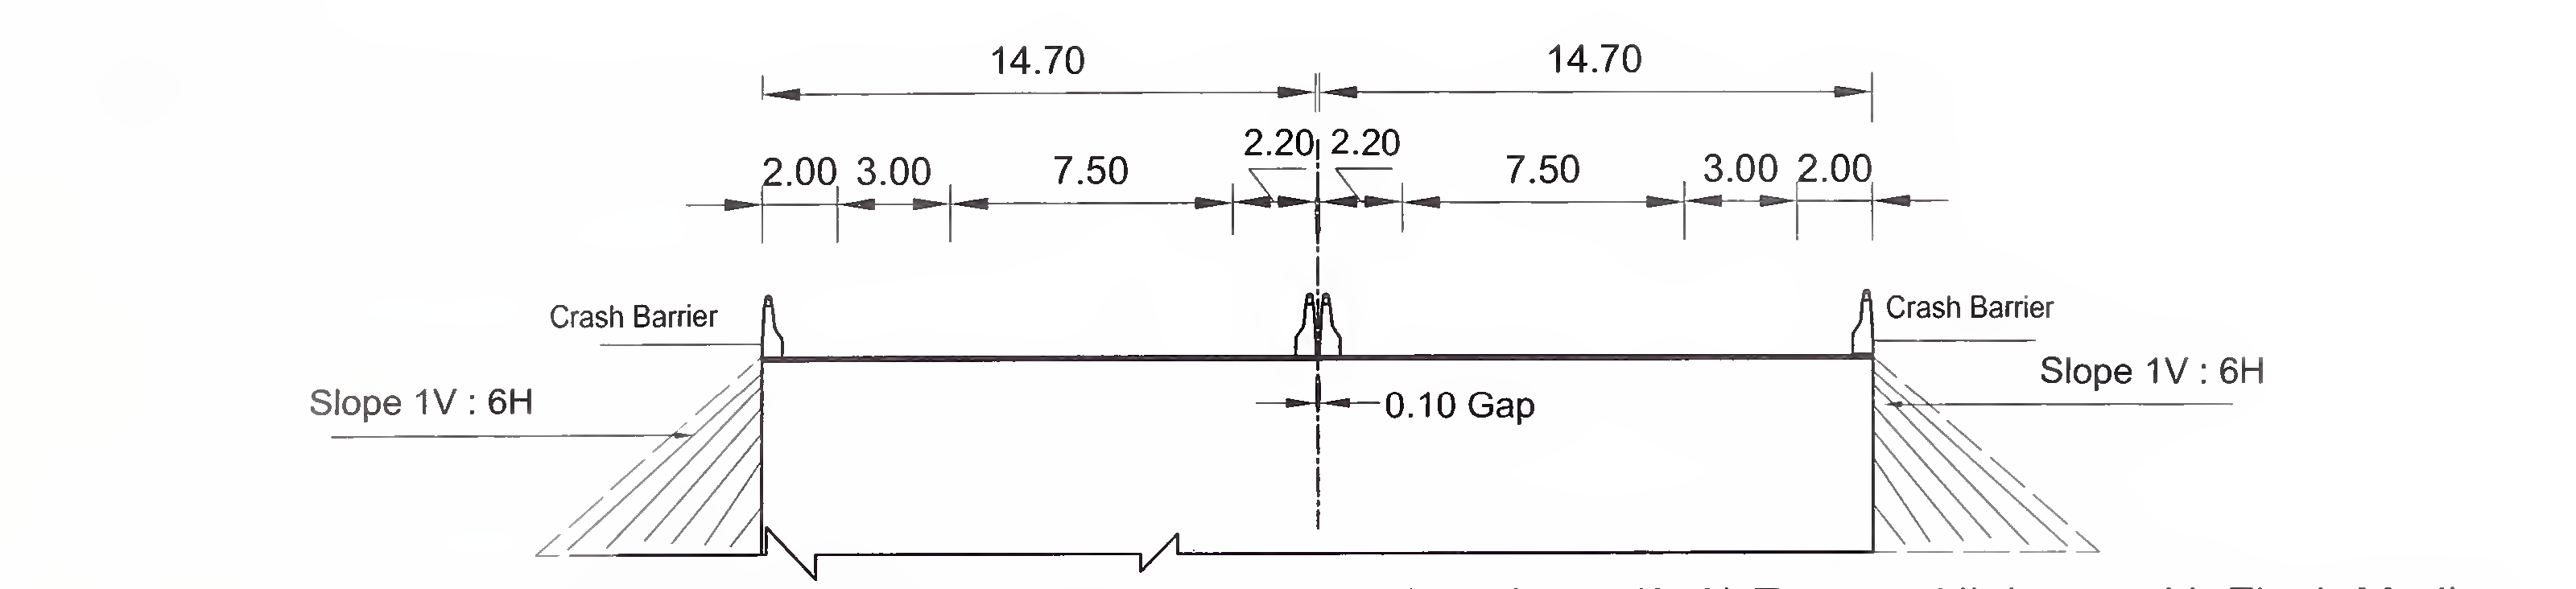 Fig. 6.4 (a) Typical Cross-section of Slab and Box Type Culvert for 4-Lane(2×2) Express Highway with Flush Median